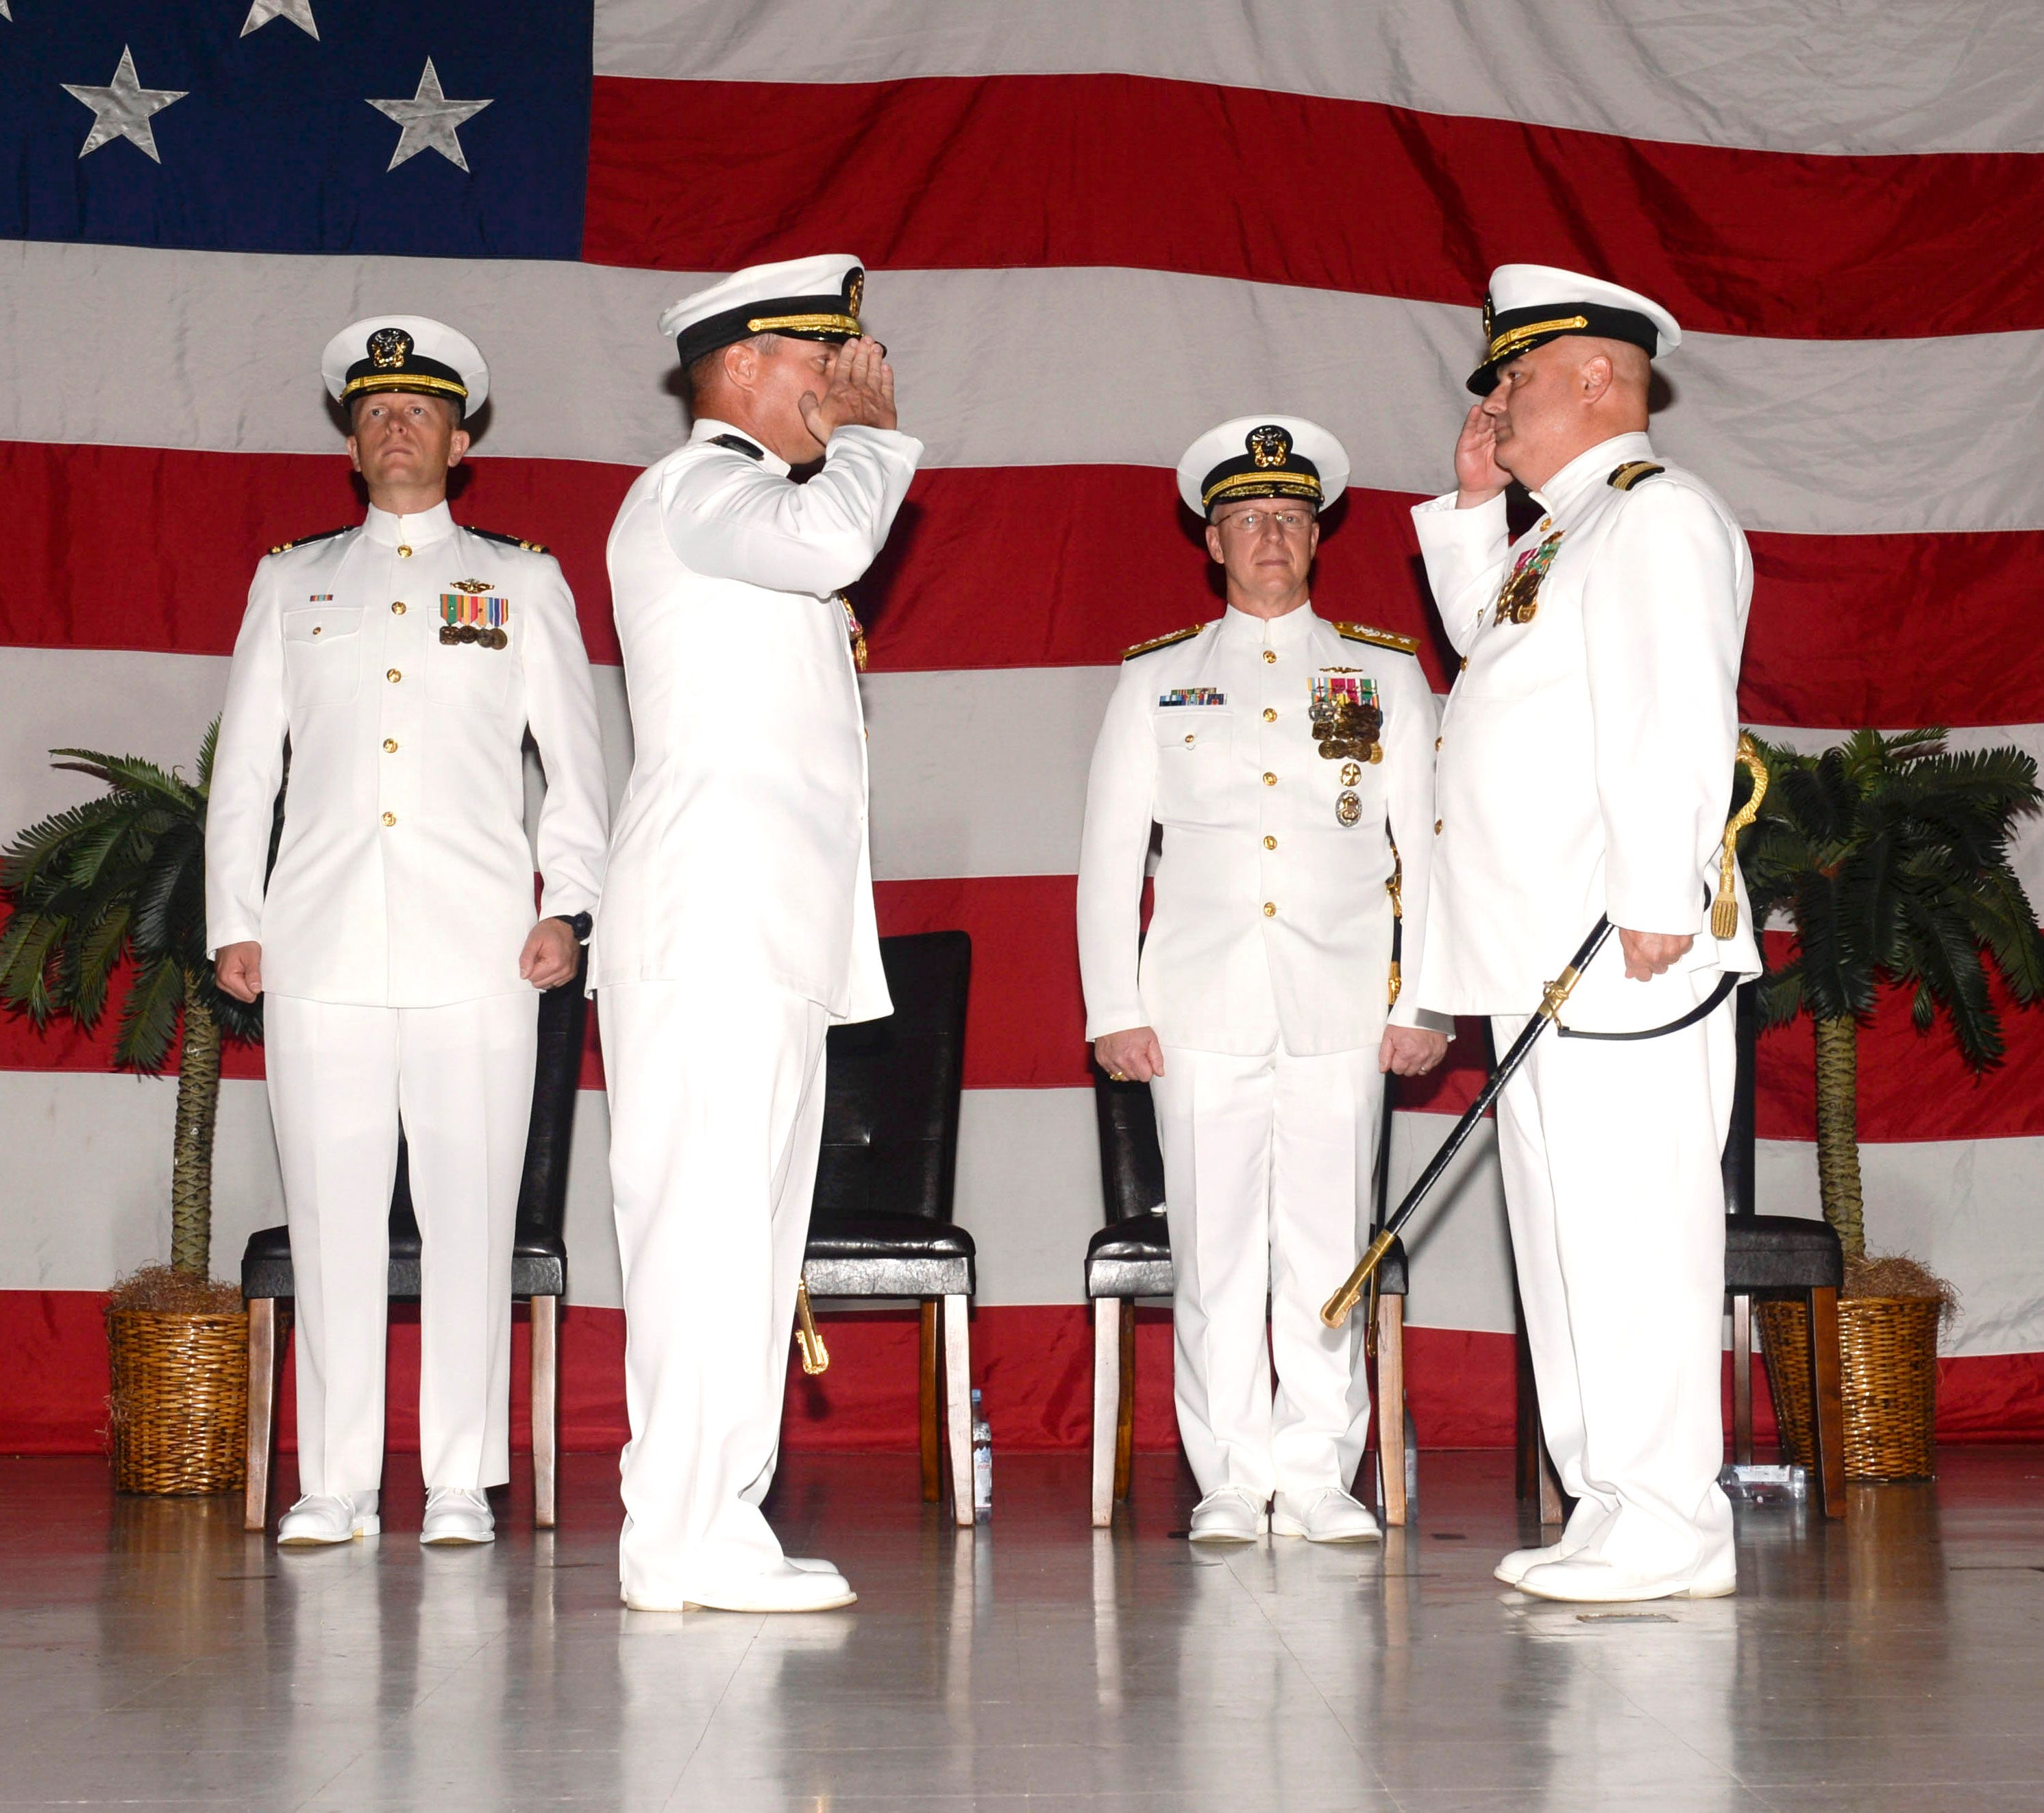 Capt. Timothy J. Poe takes command of Submarine Squadron 15, Local News